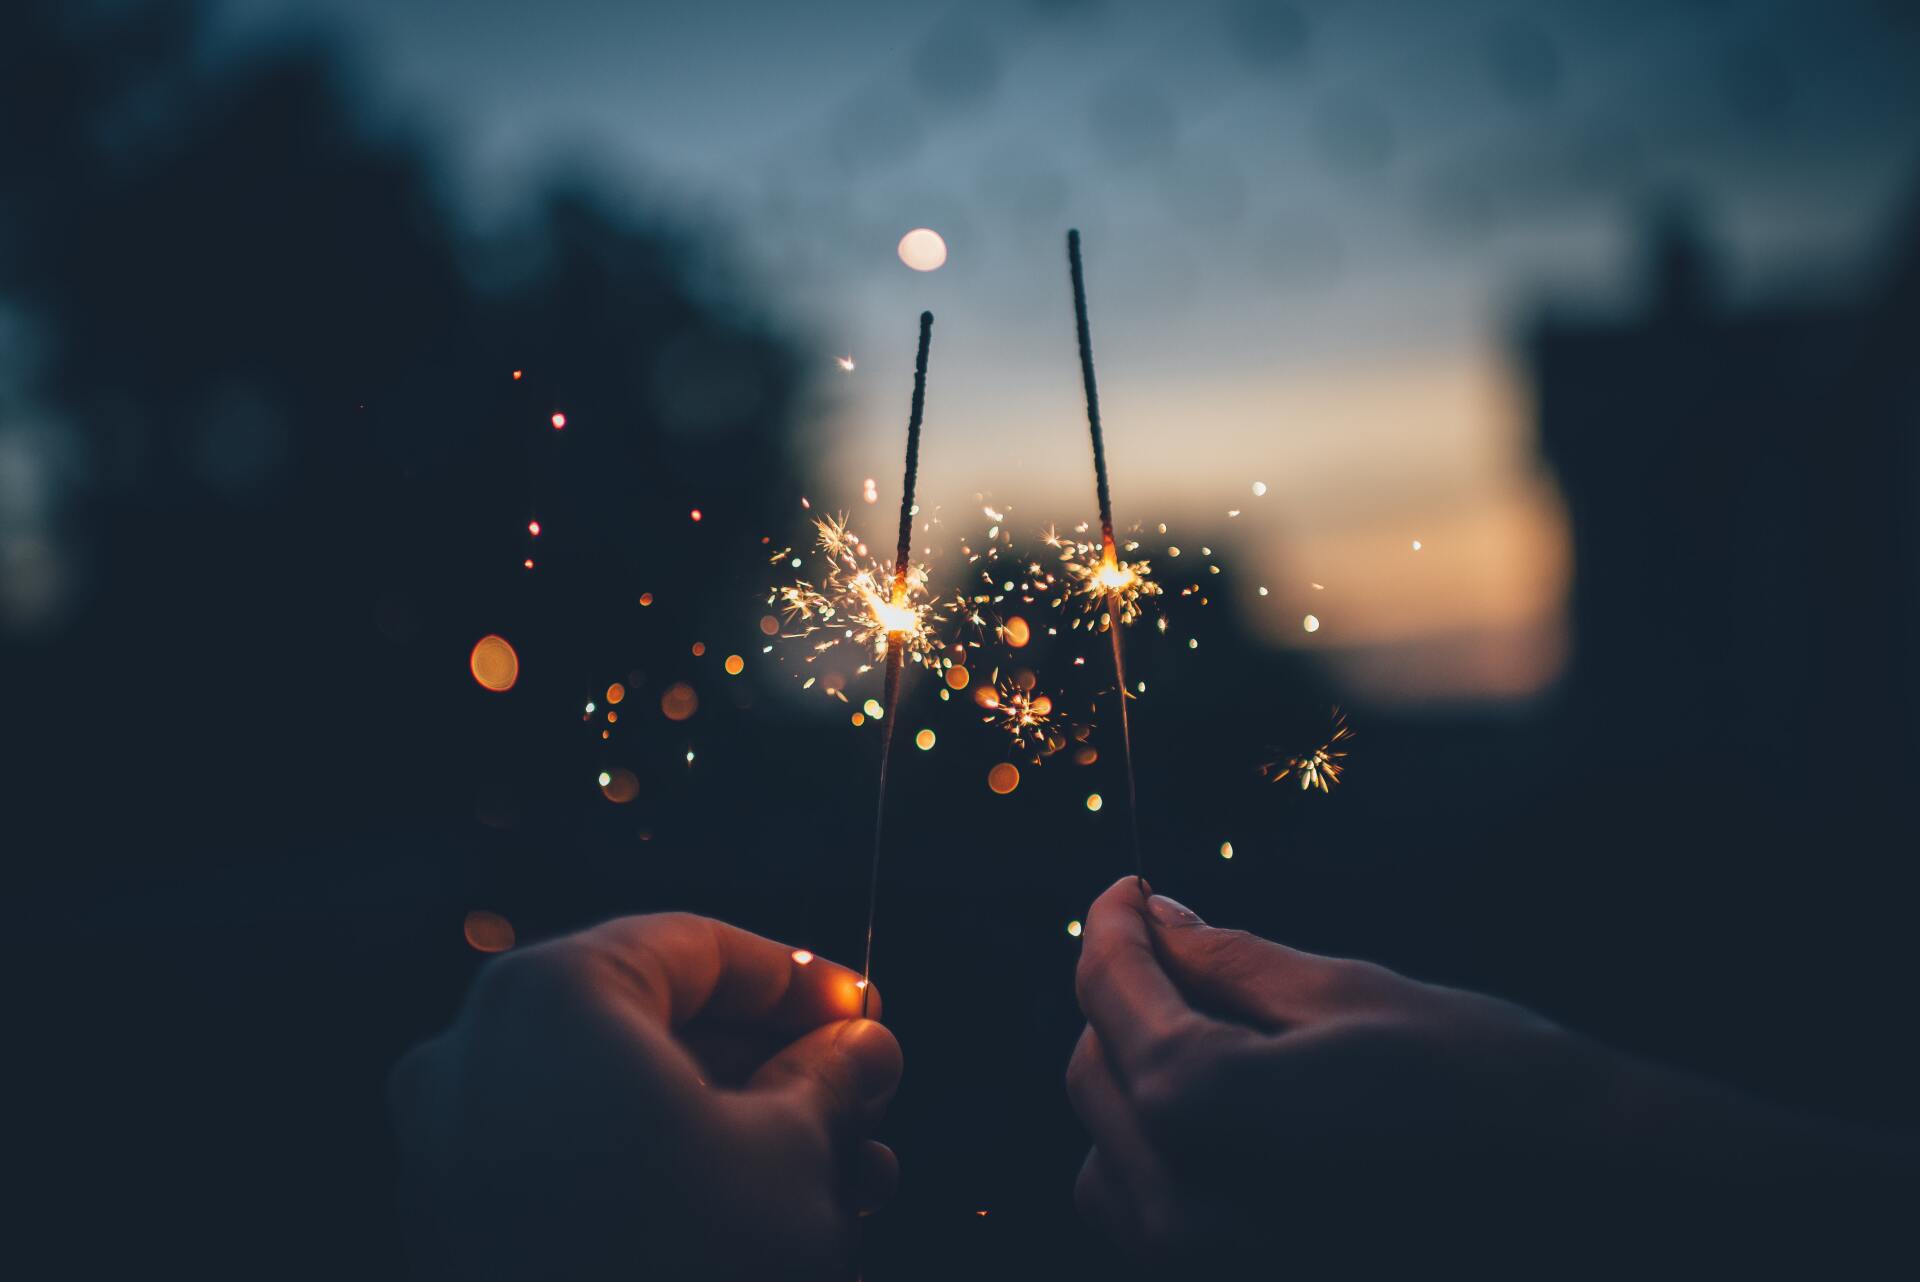 A person is holding two sparklers in their hands at night.